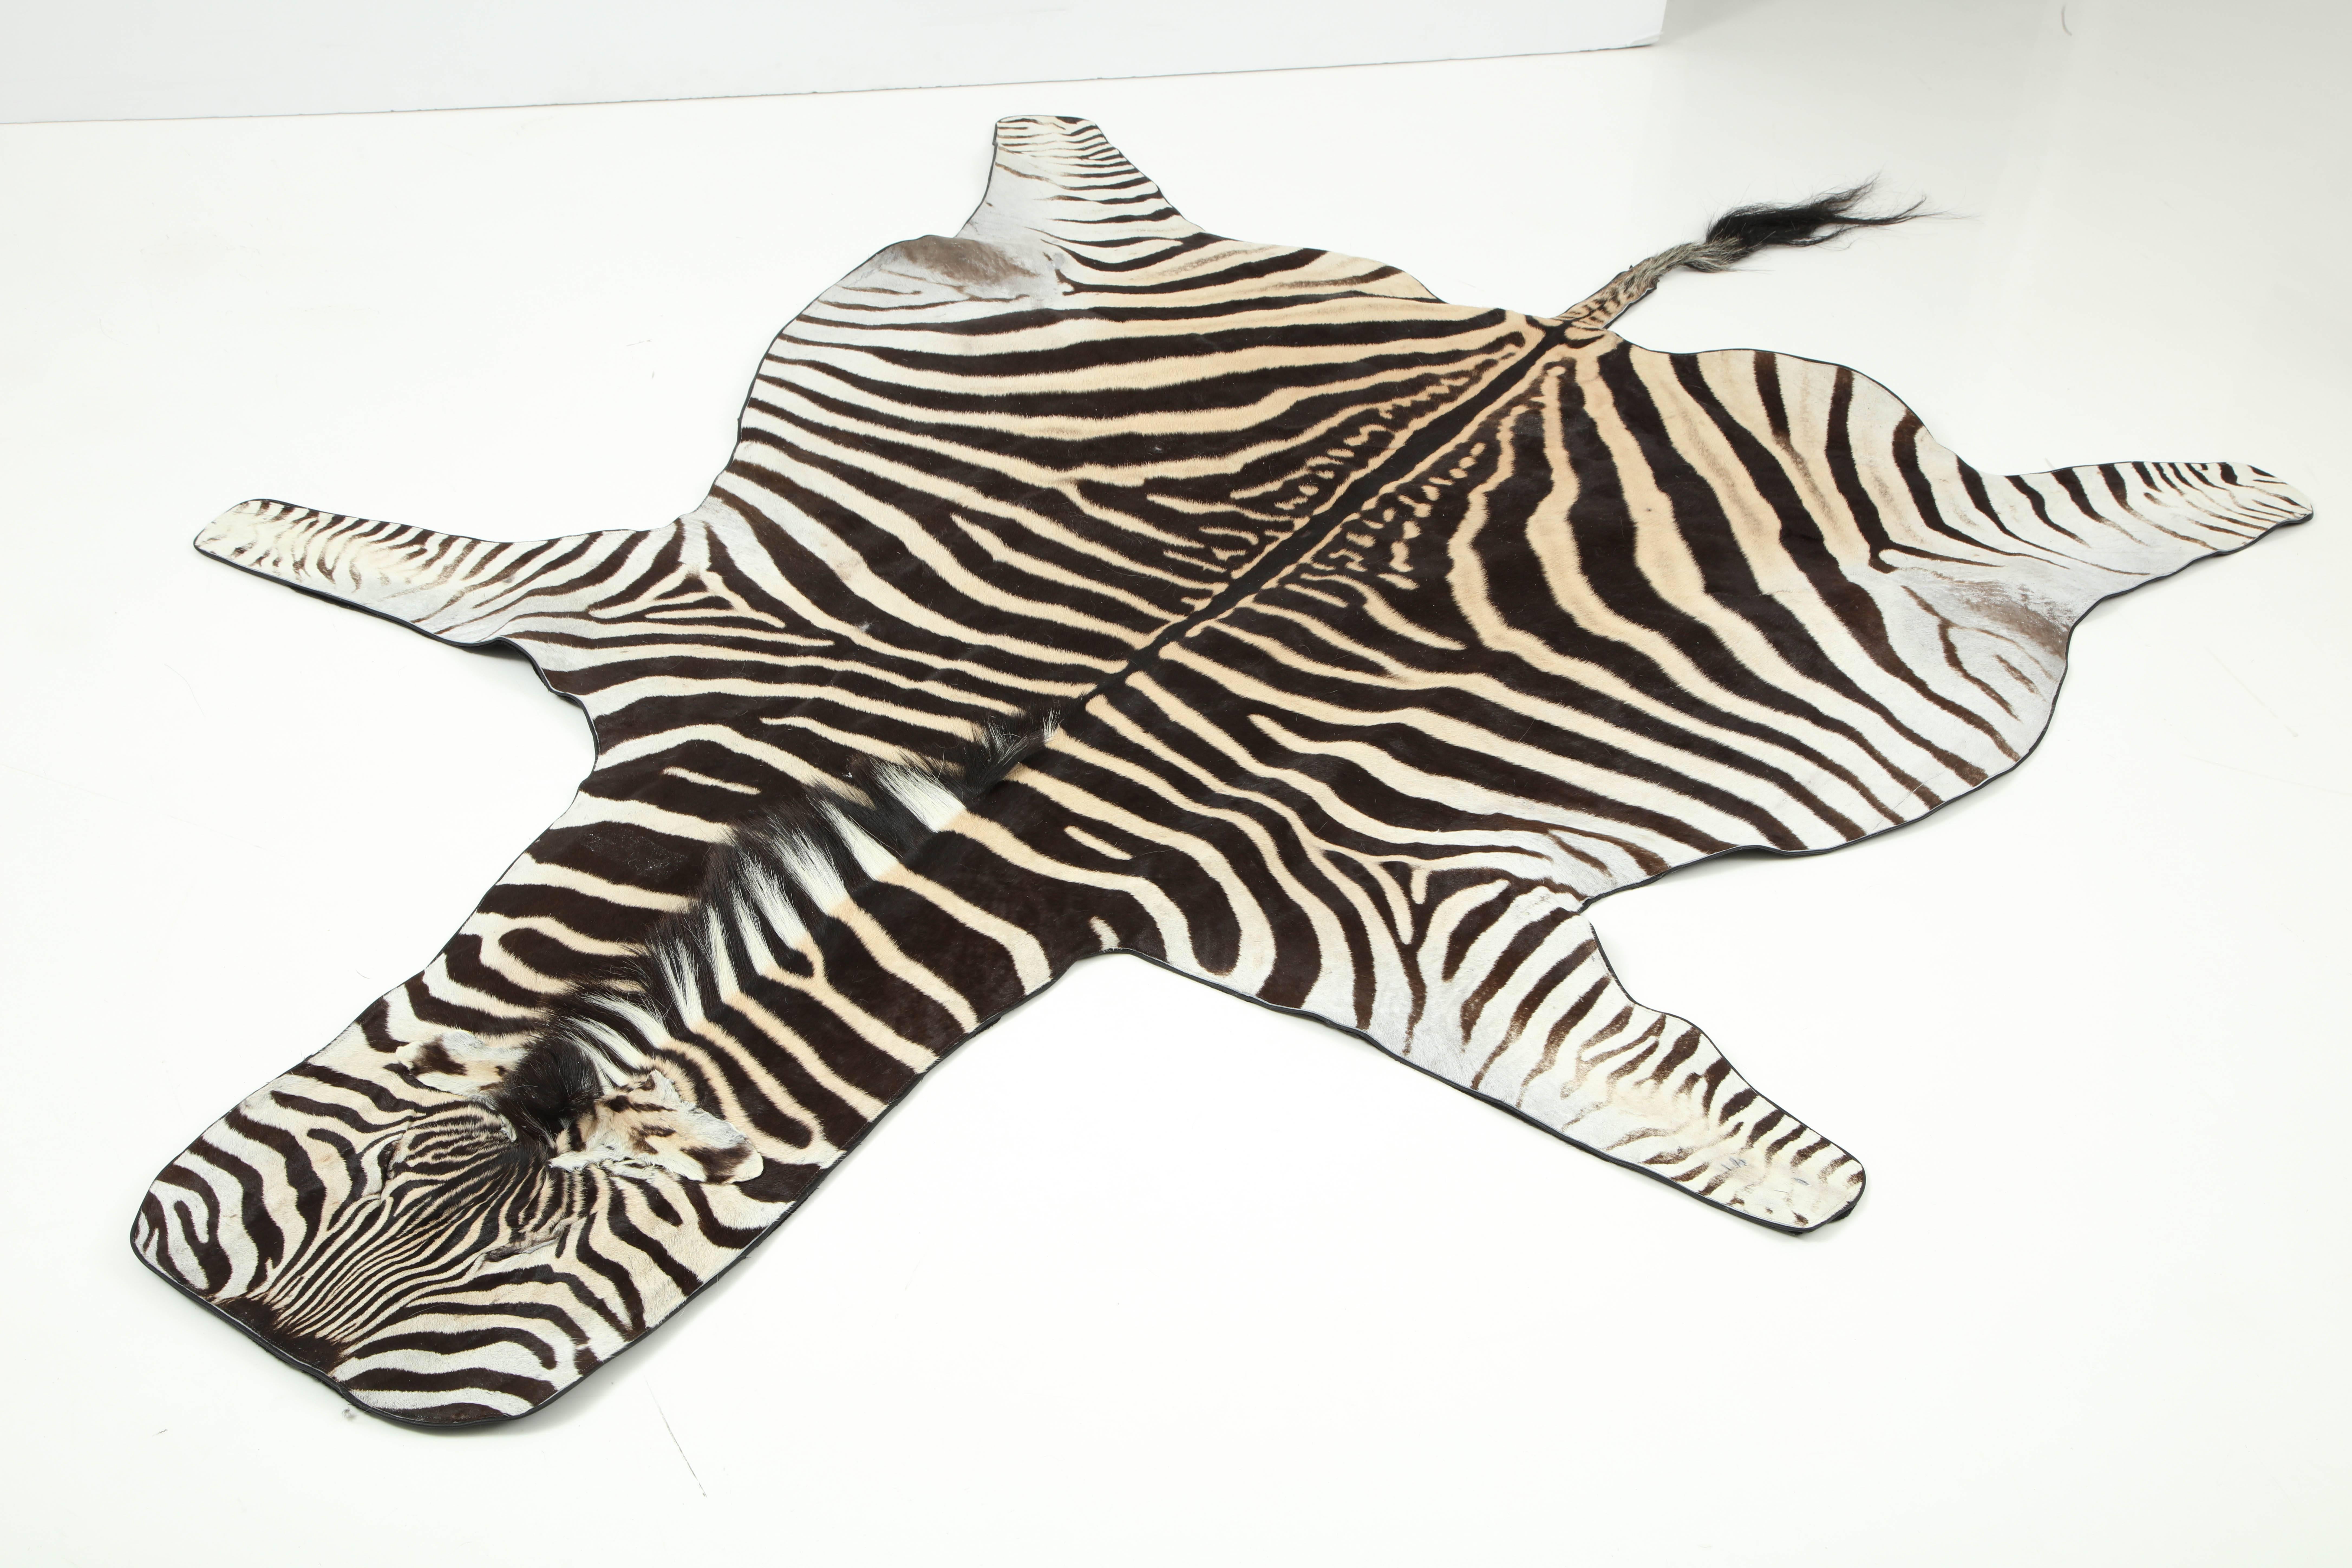 Zebra rug from South Africa. The hide is backed with a wool fabric and trimmed with leather.